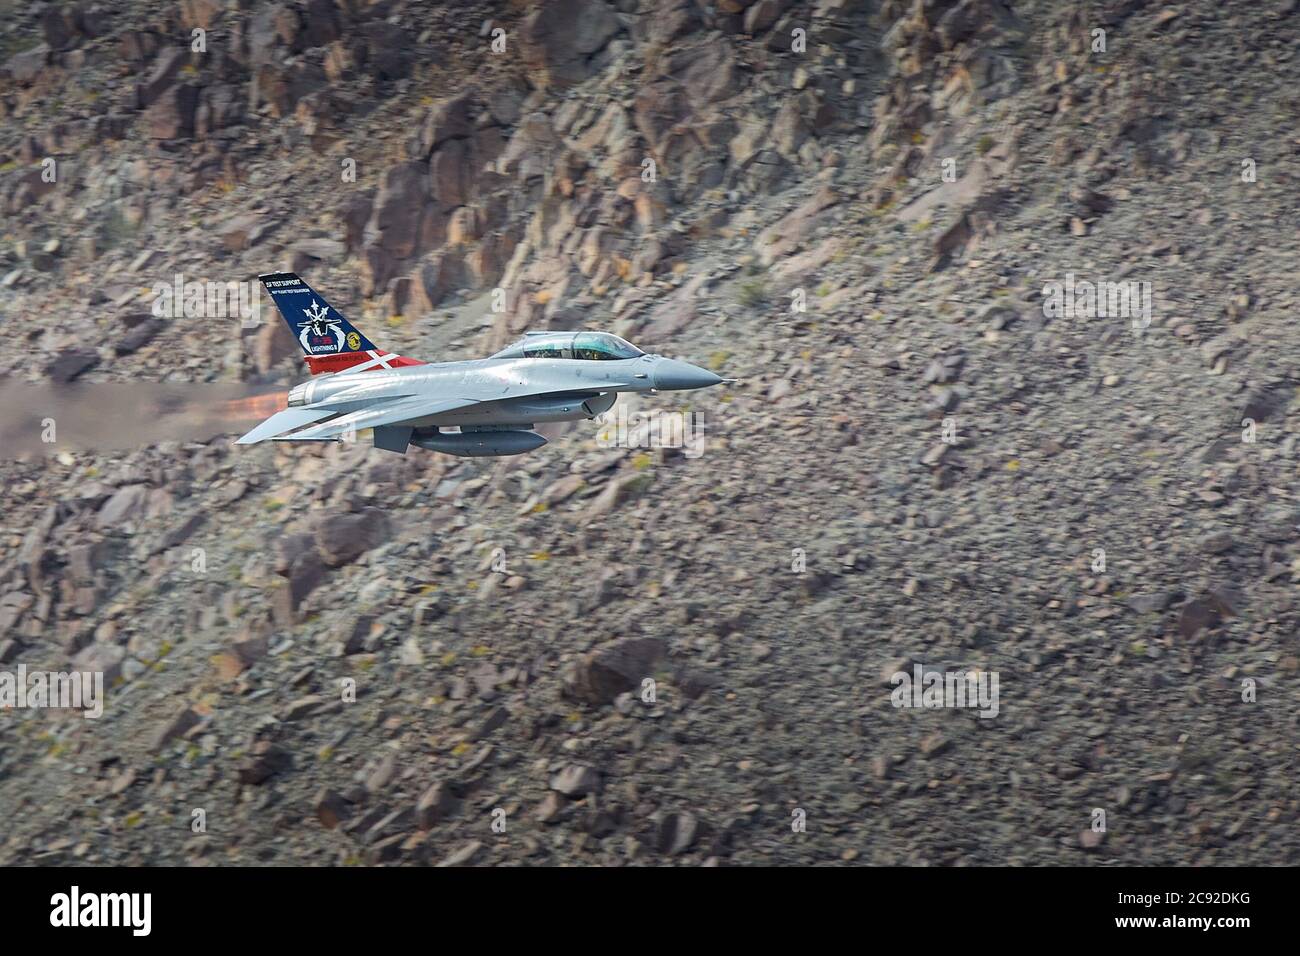 Royal Danish Air Force F-16, With Reheat (Afterburner) Alight, Flying At Low Level And High Speed Though Rainbow Canyon, California, USA. Stock Photo